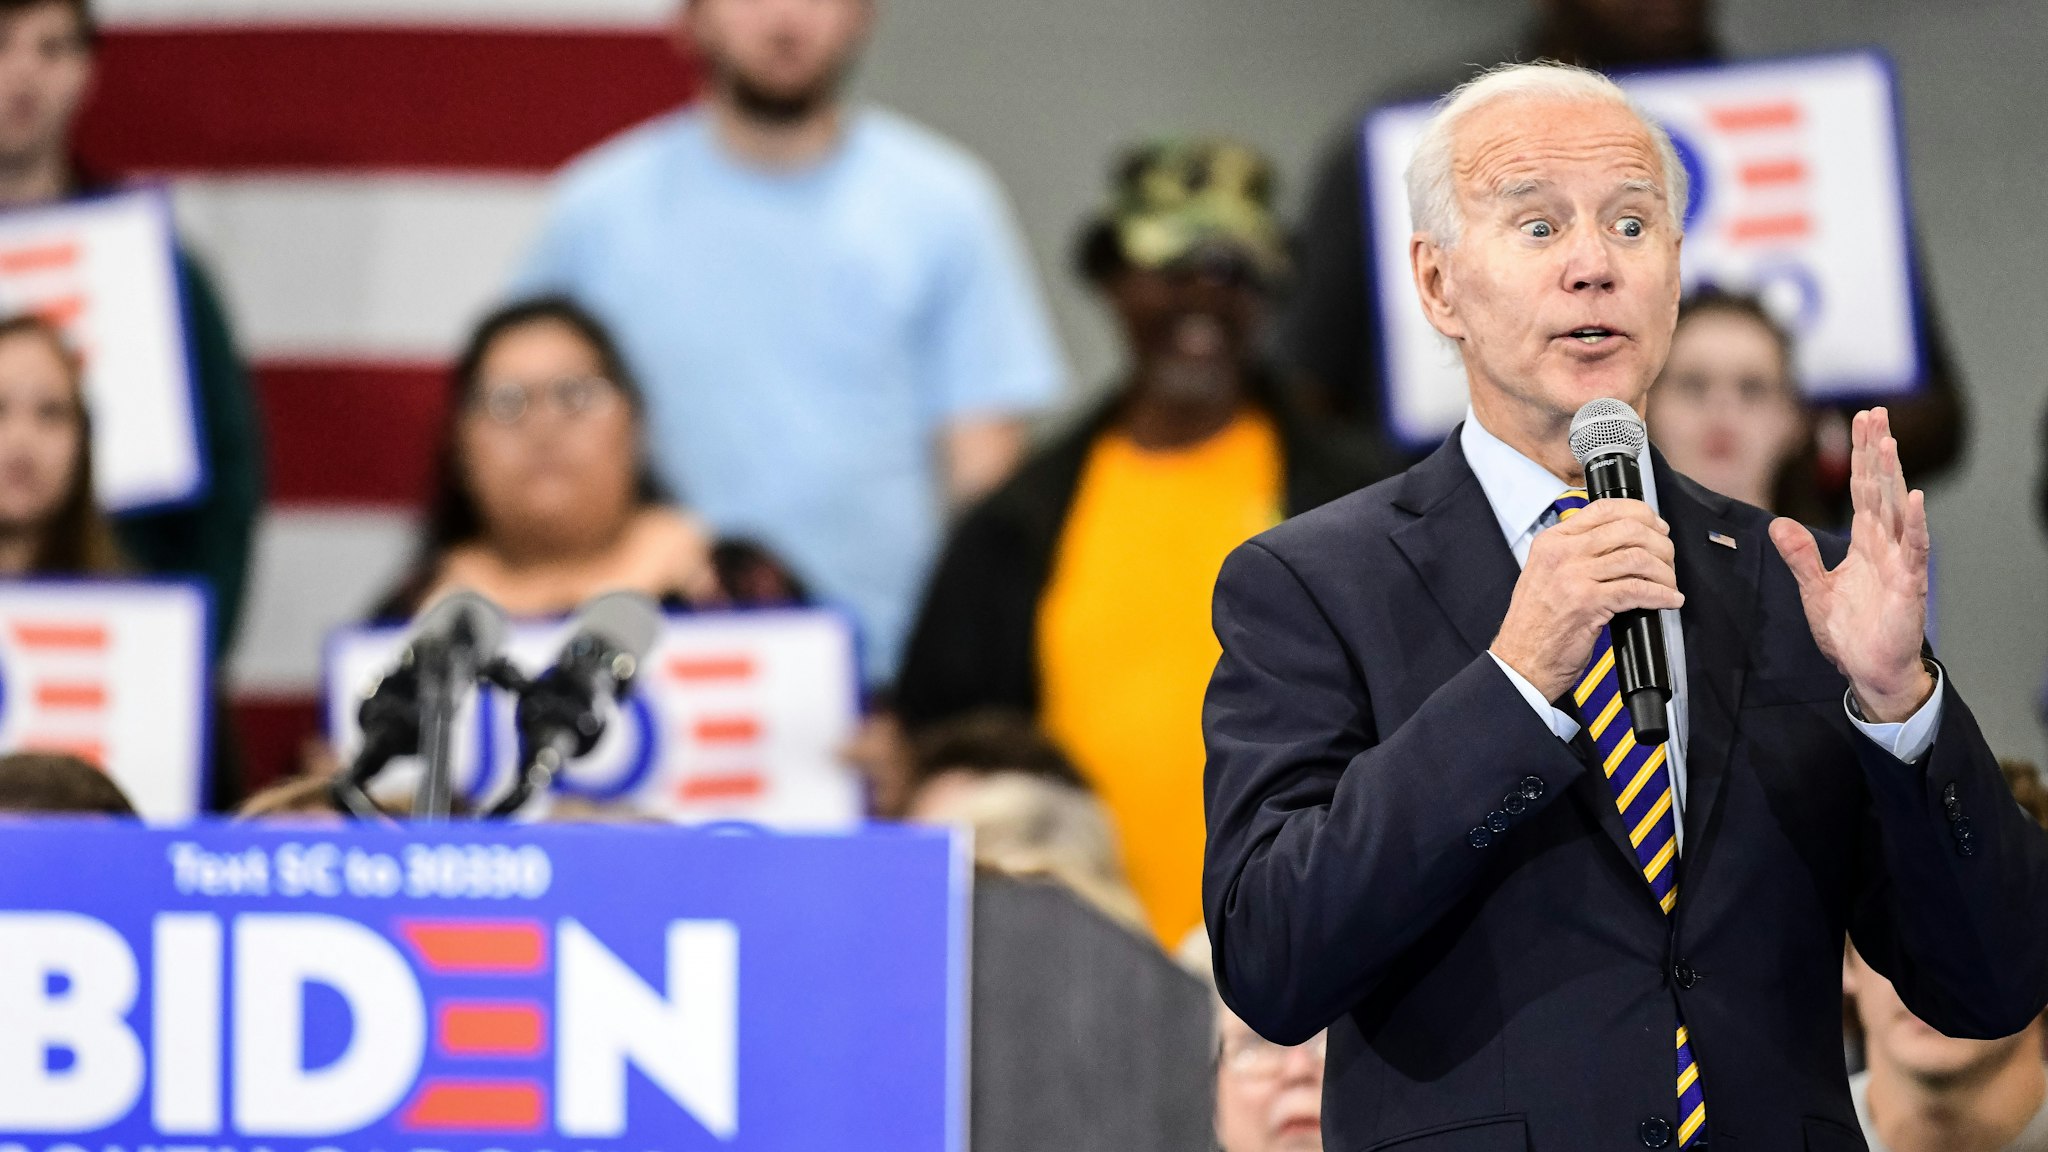 Democratic presidential candidate, former vice President Joe Biden speaks to the audience during a town hall on November 21, 2019 in Greenwood, South Carolina. Polls show Biden with a commanding lead in the early primary state.